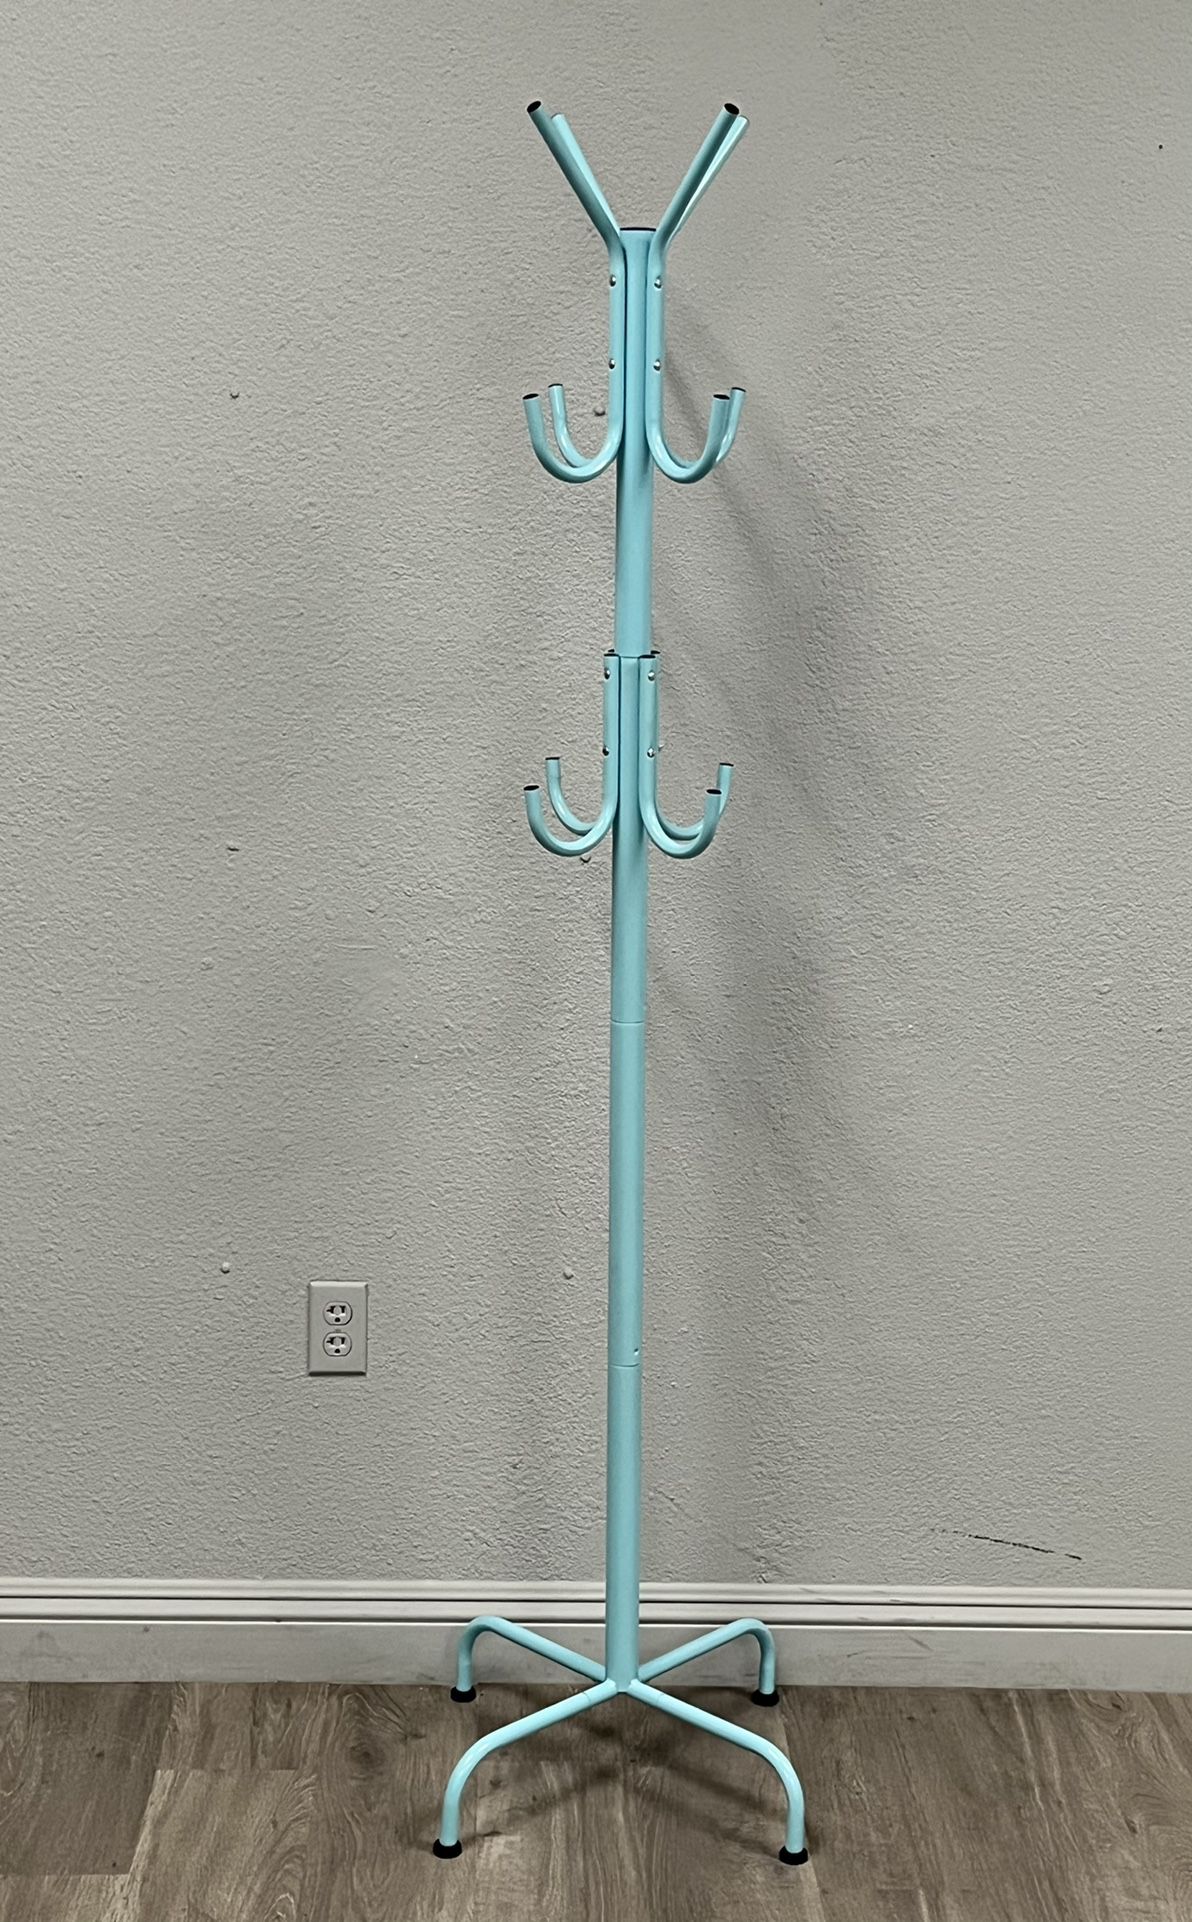 New Tiffany Blue Modern Coat Rack 6 ft Tall : 4 available at $20